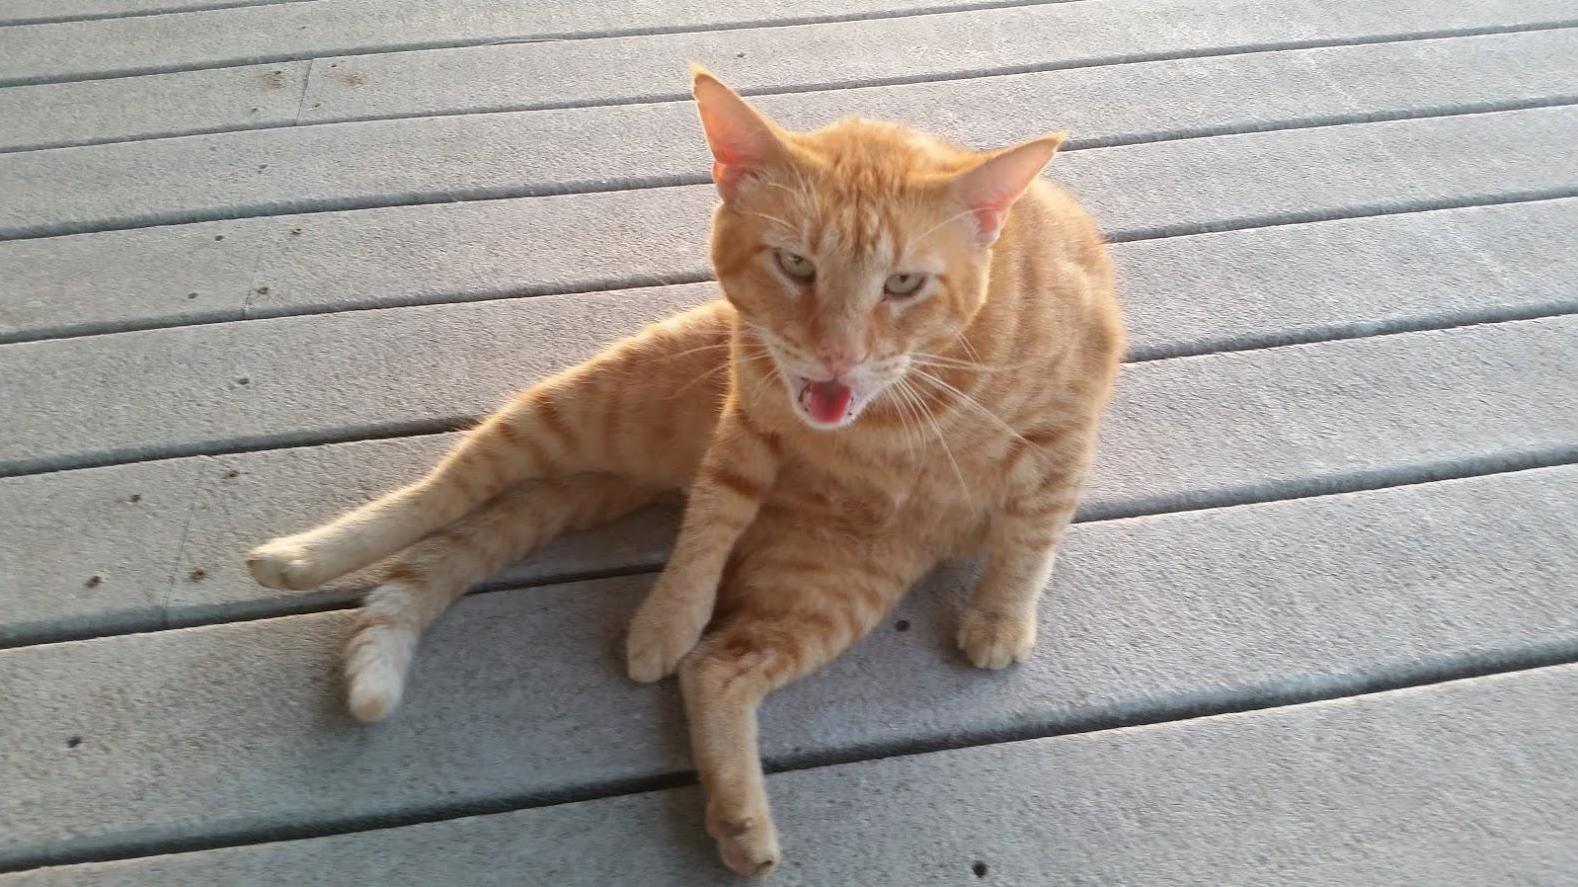 This asshole just walked on to my grandmothers dock while i was drinking my morning coffee plopped his ass down at my feet and started licking his balls.